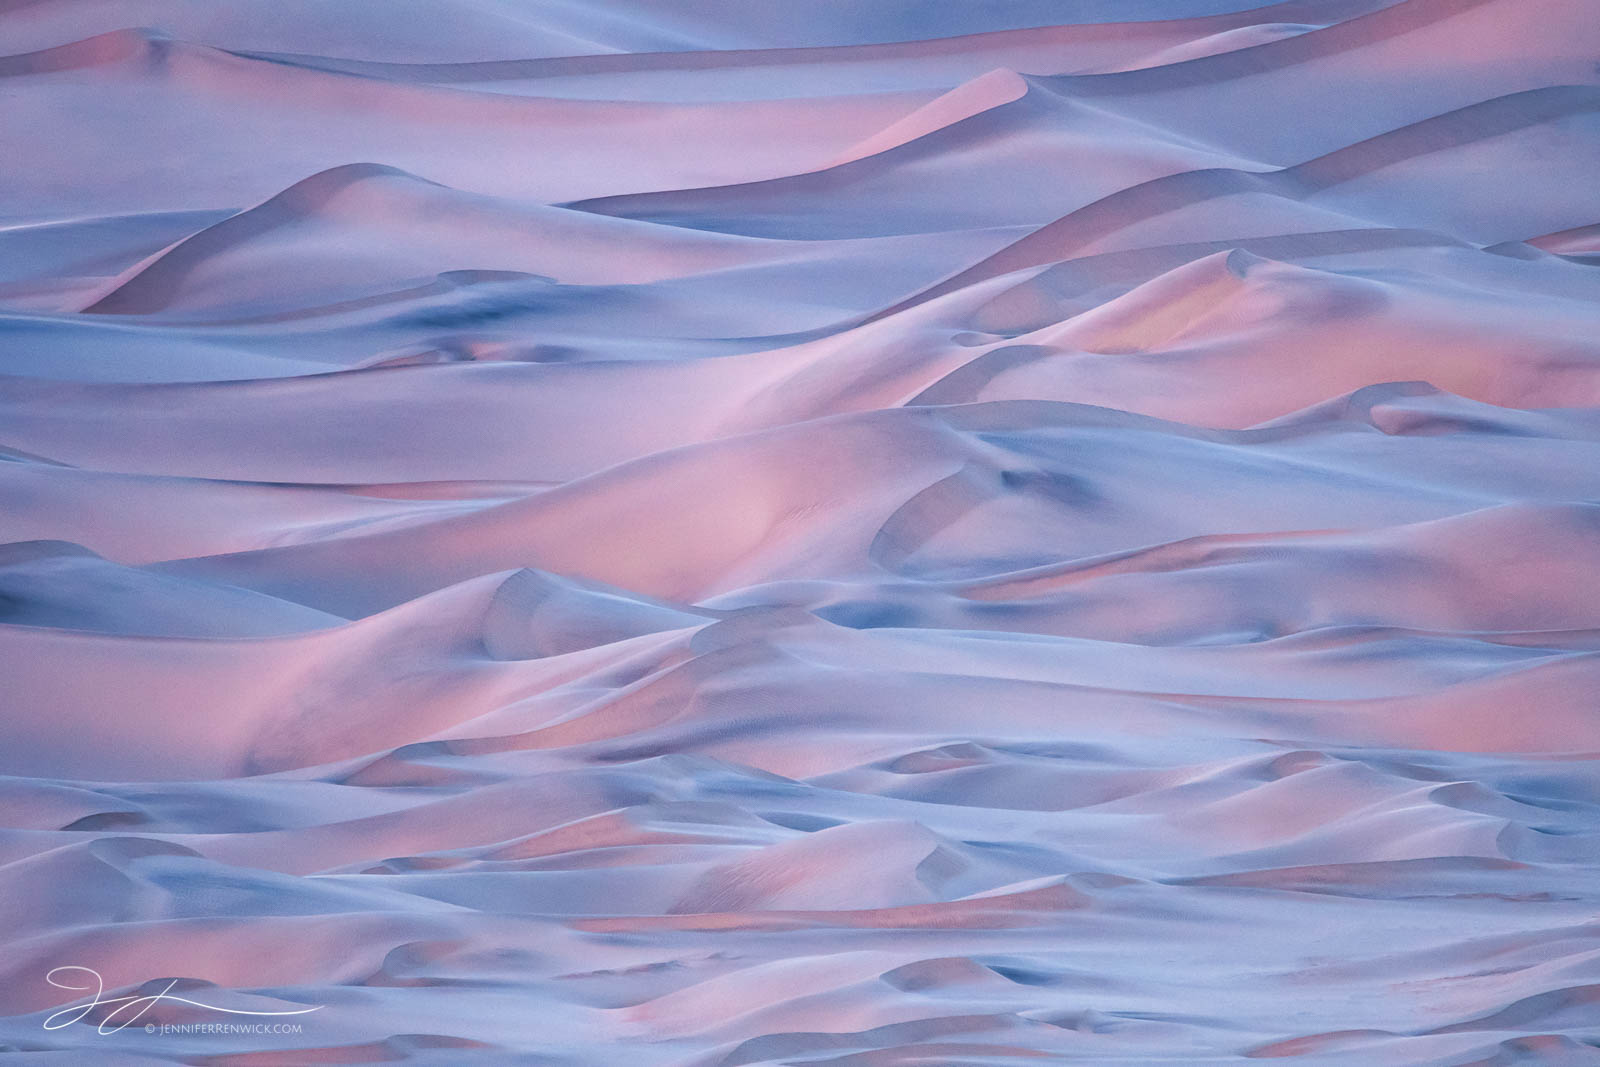 Sand dunes in Death Valley reflect pink from the sky after sunset.